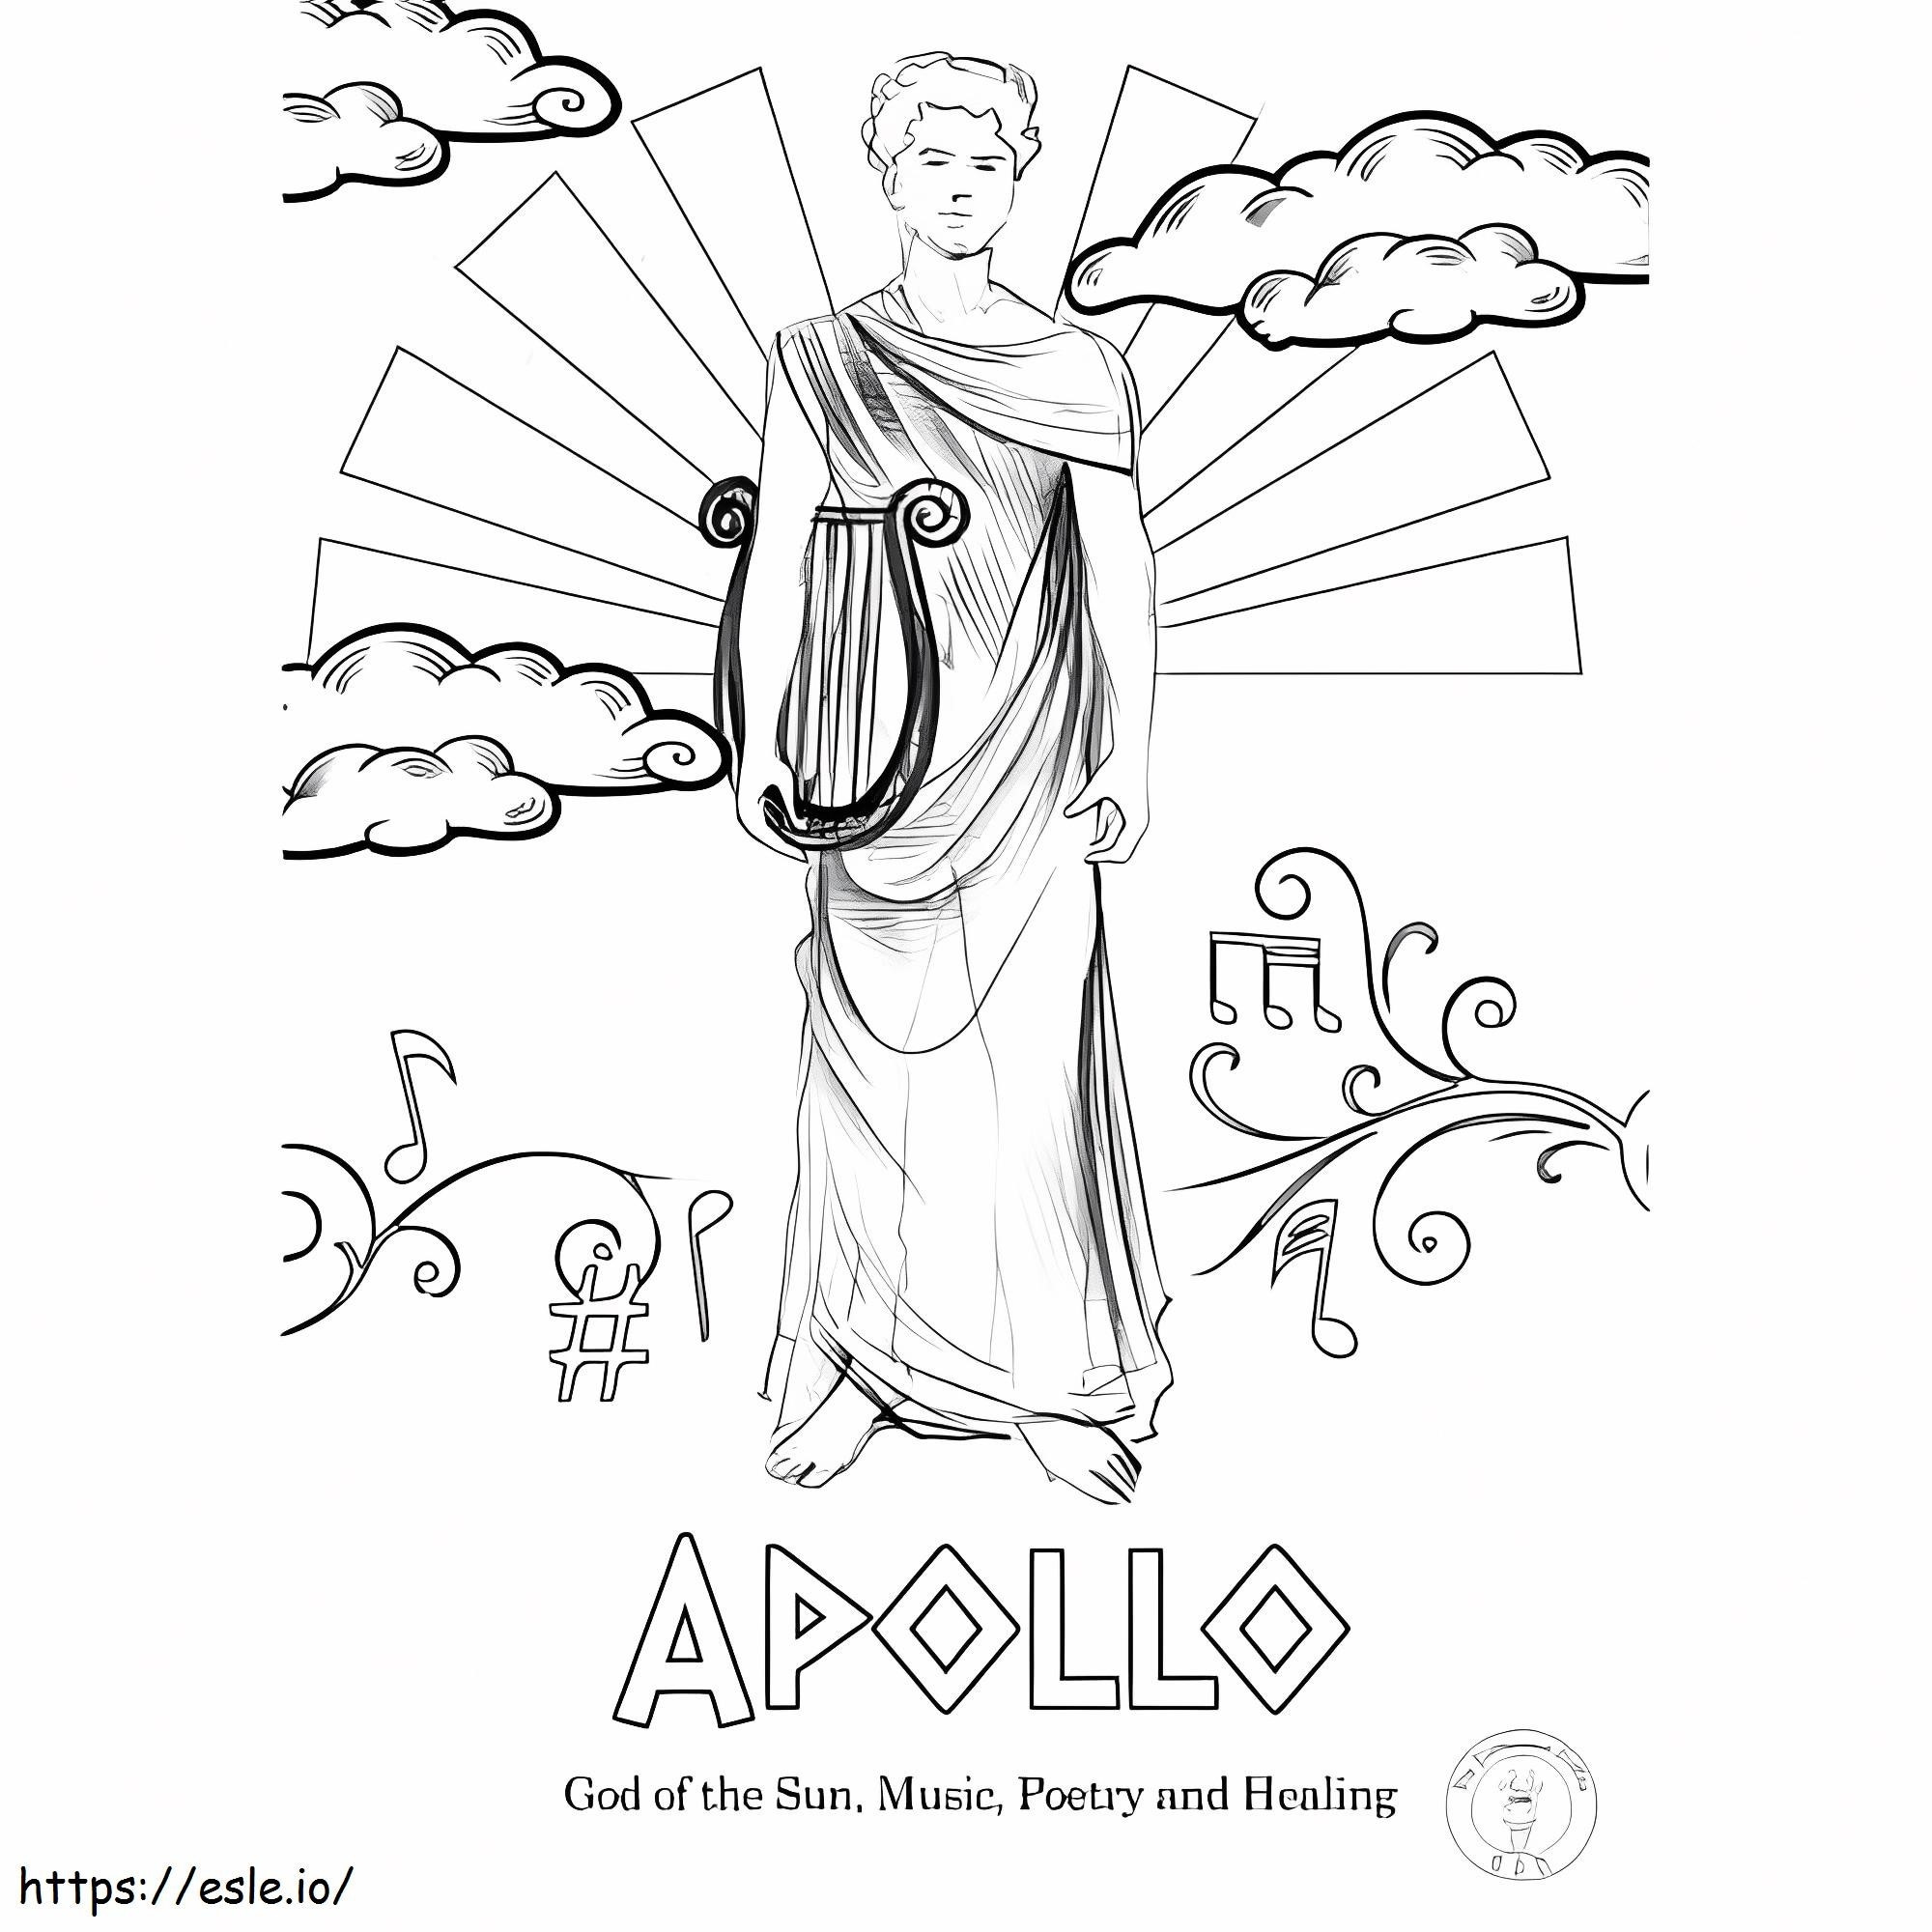 Greek Gods coloring page